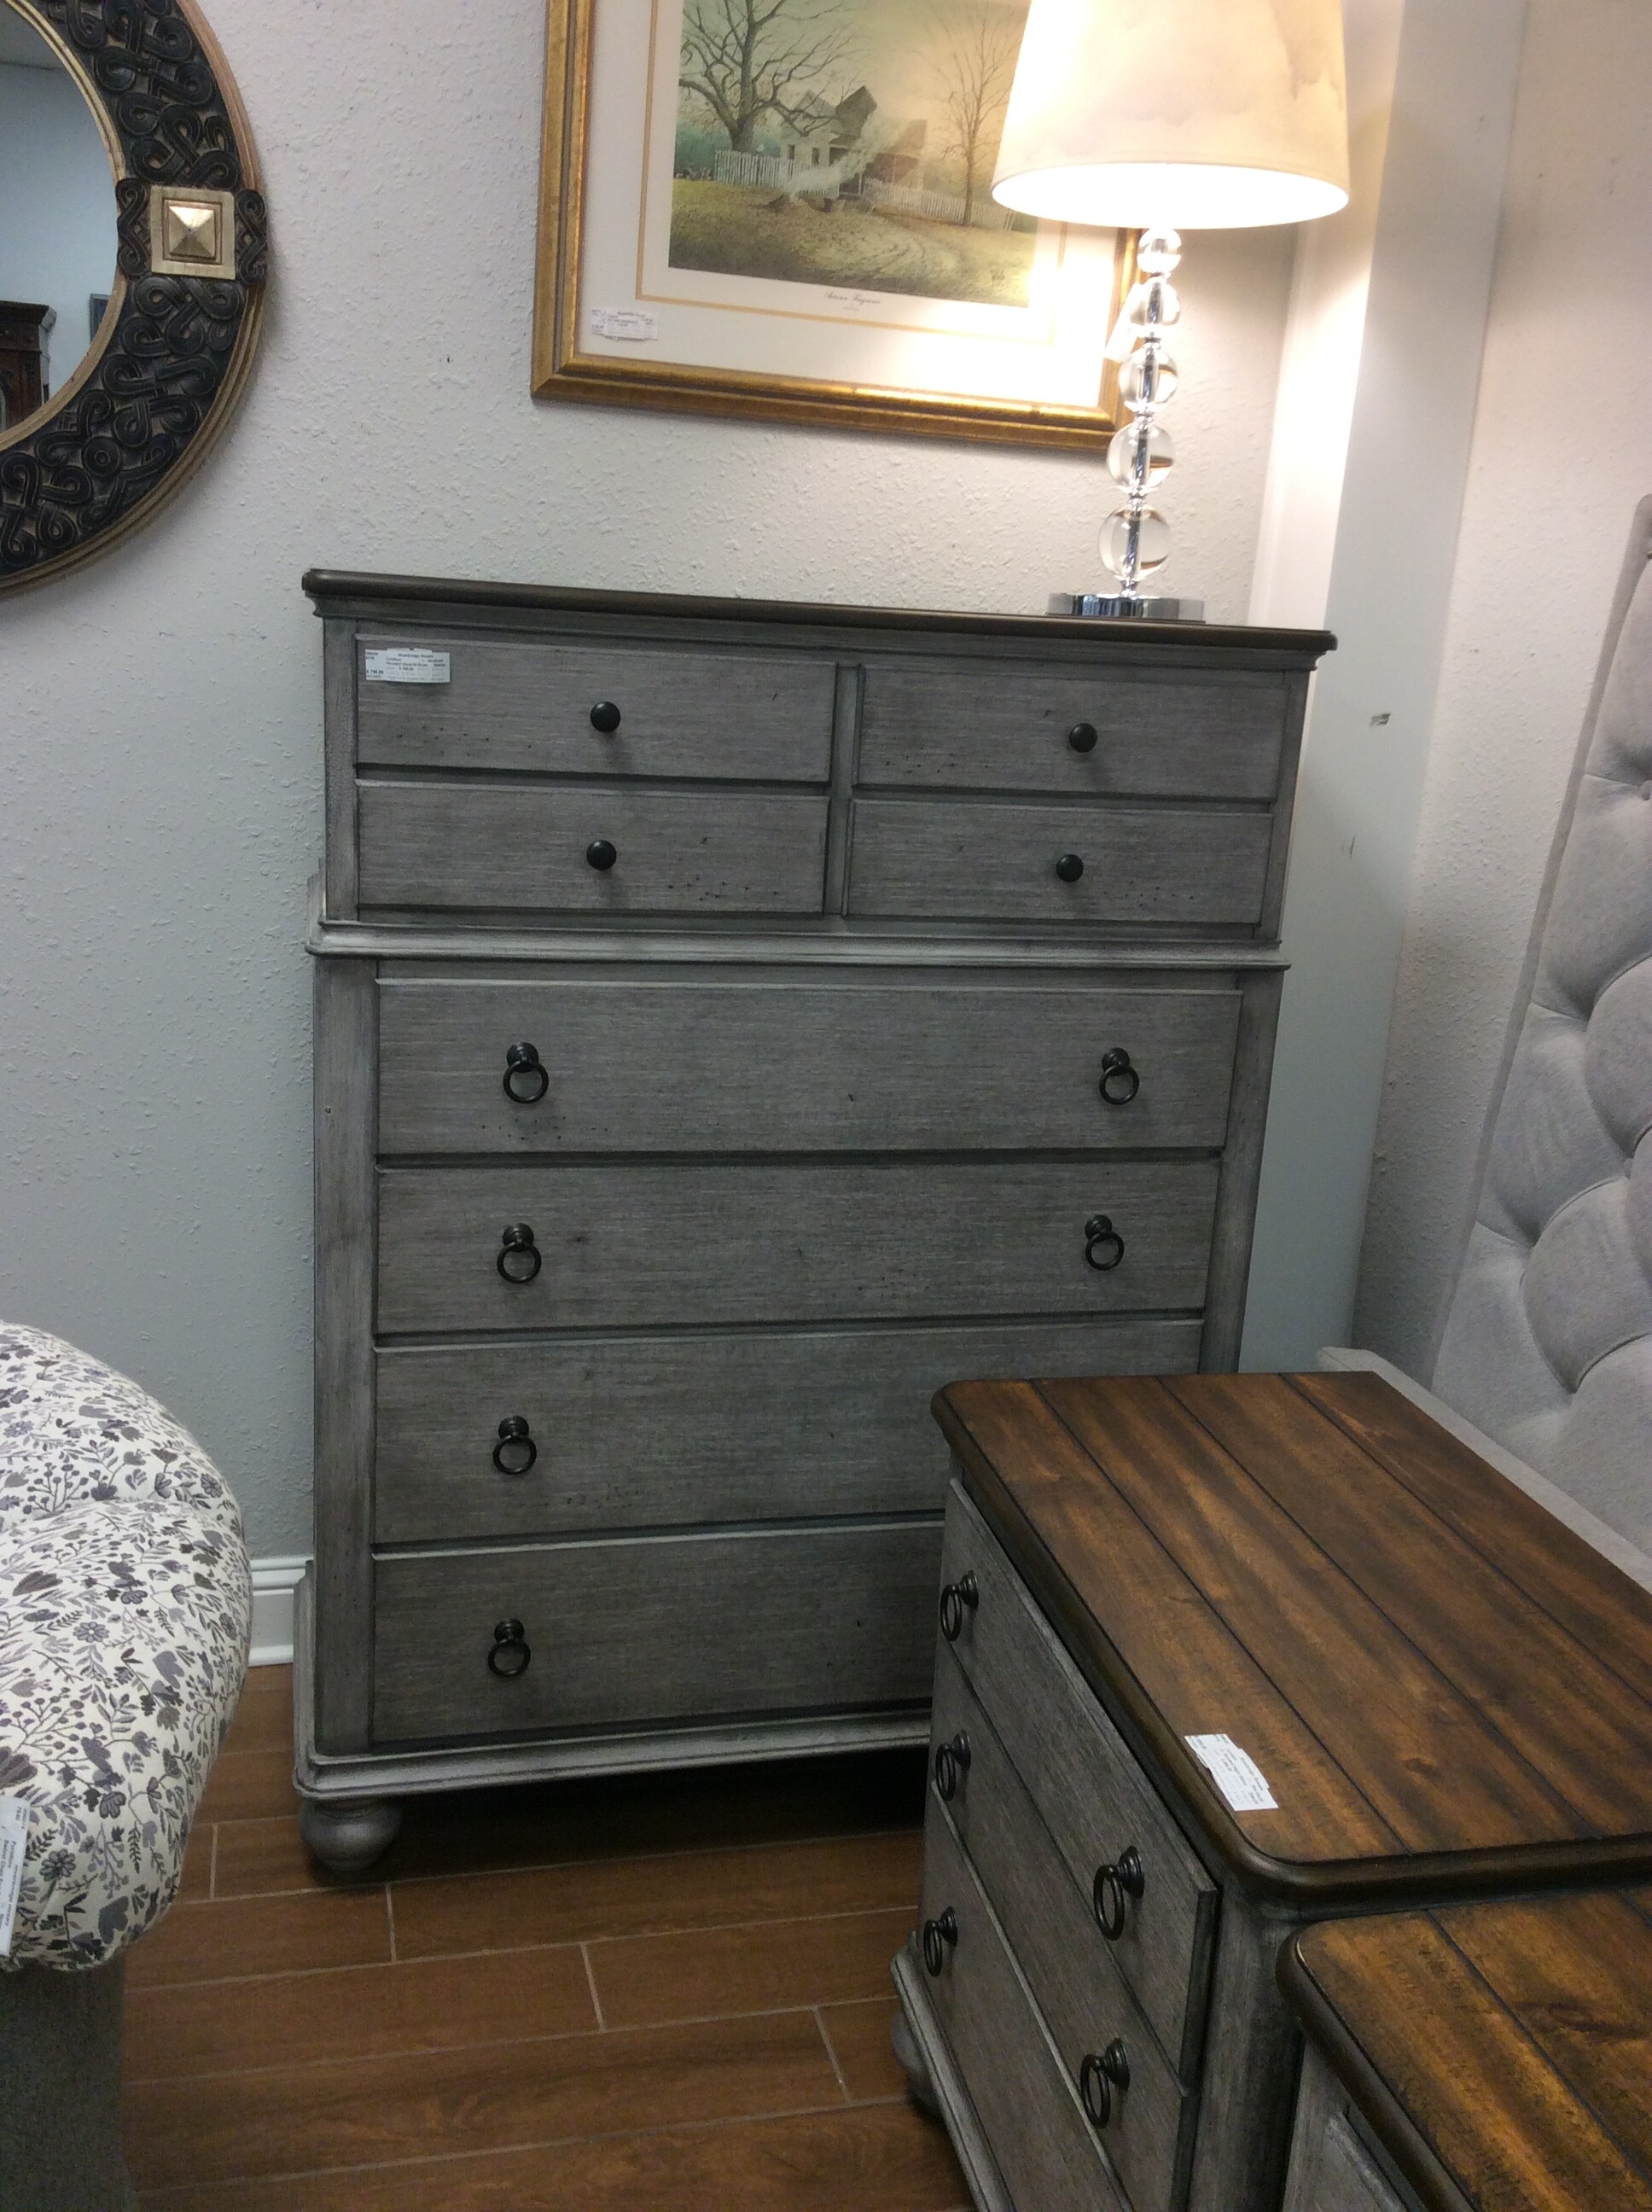 This is a beautiful, rustic gray with dark top, Flexsteel chest of drawers. This chest of drawers has 8 drawers.